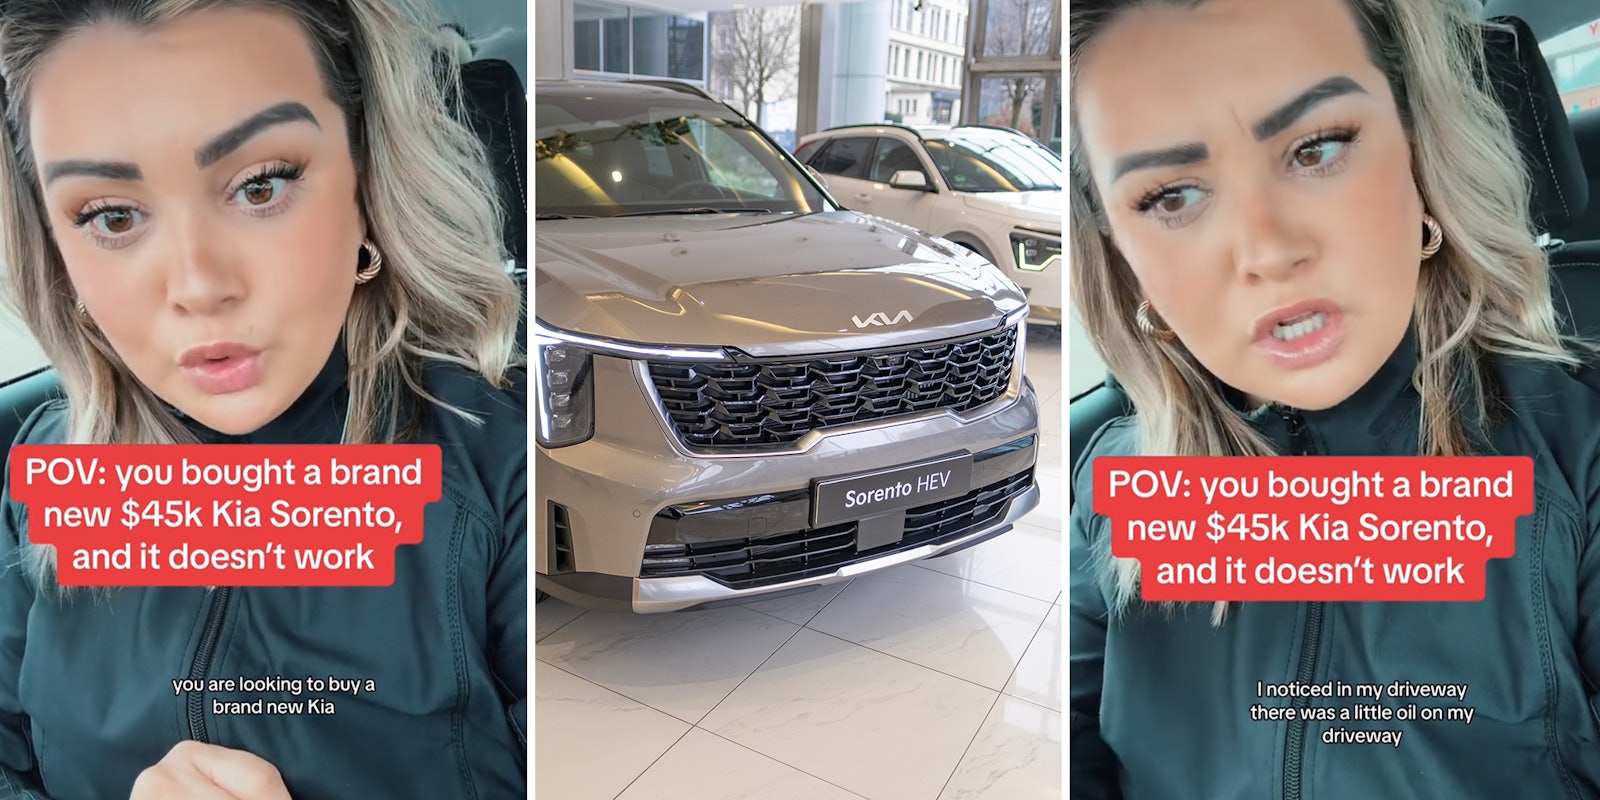 Woman spends $45,000 on a new Kia and it doesn't work